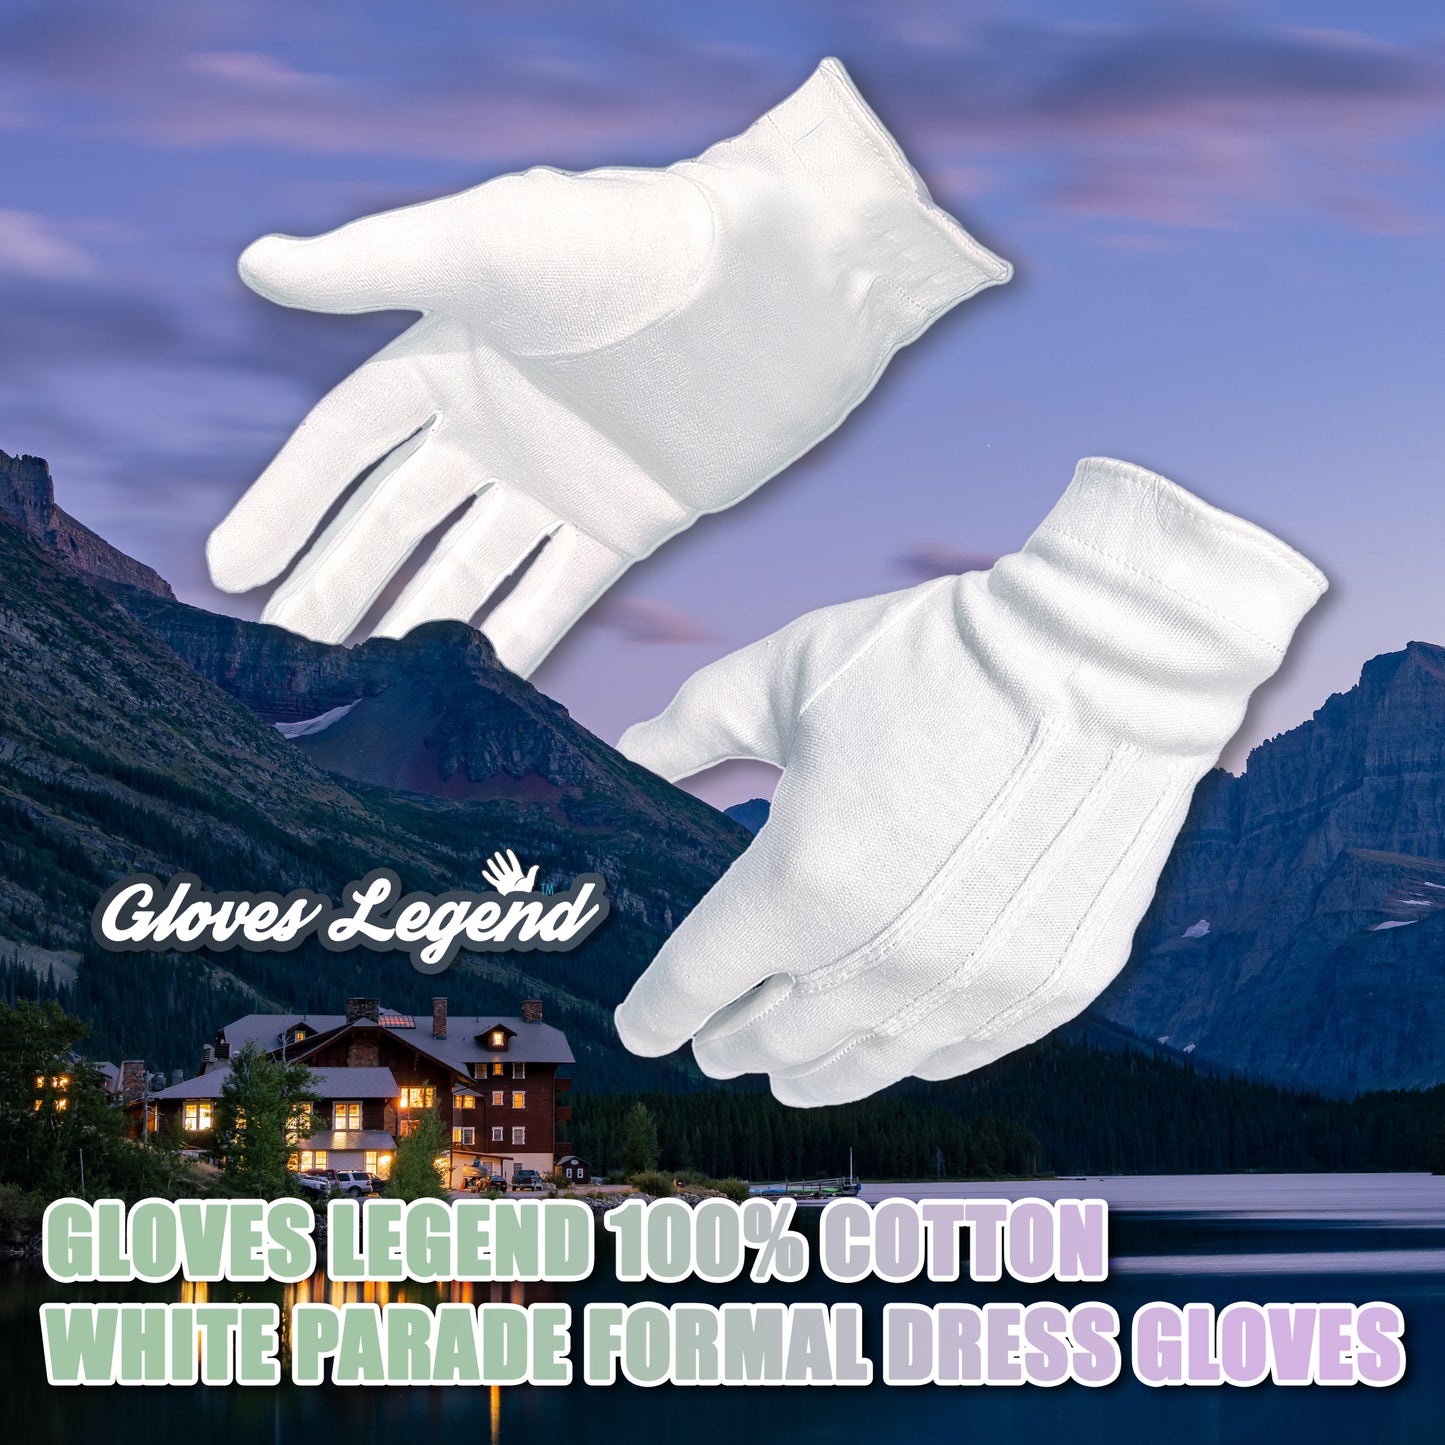 10 Pairs (20 Gloves) Size Medium - Gloves Legend 100% White Cotton Marching Parade Formal Dress Gloves